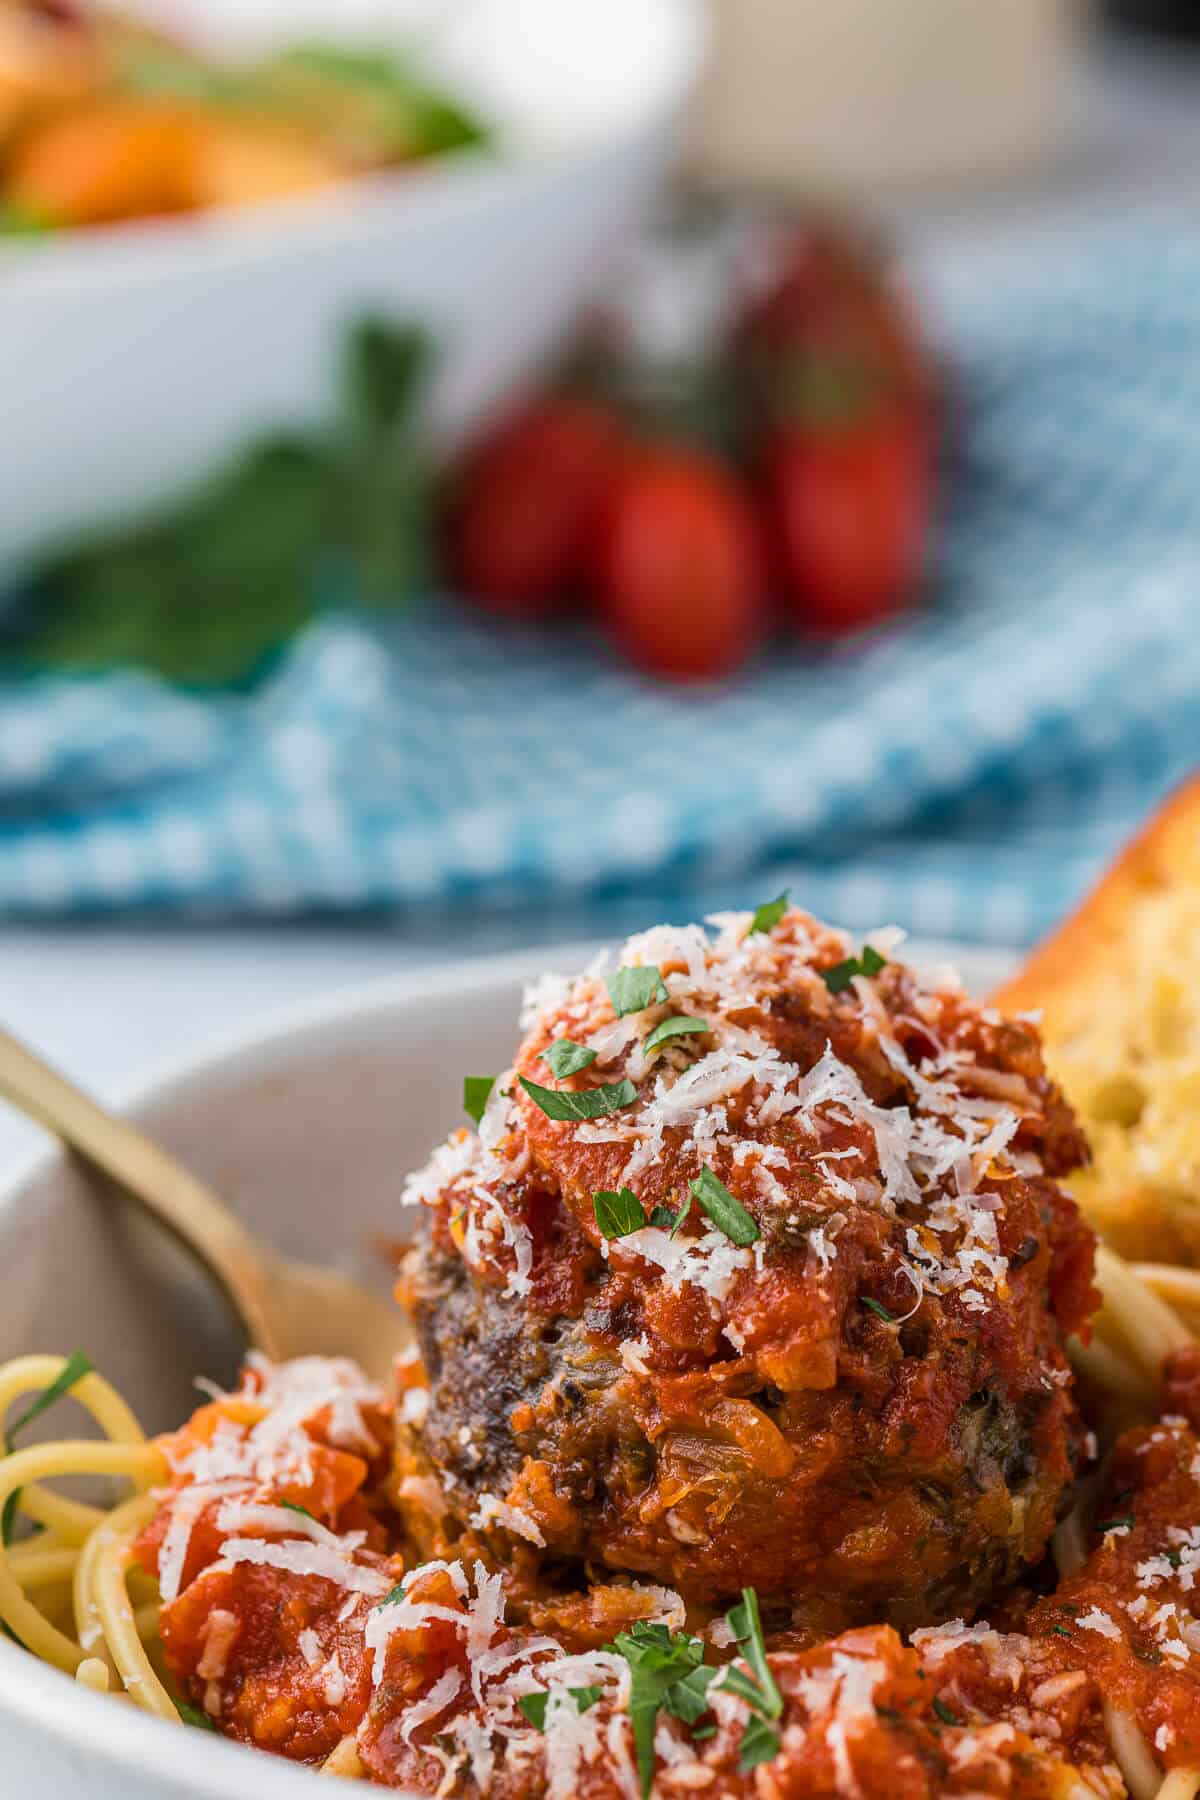 Cheesy meatballs with spaghetti and sauce.